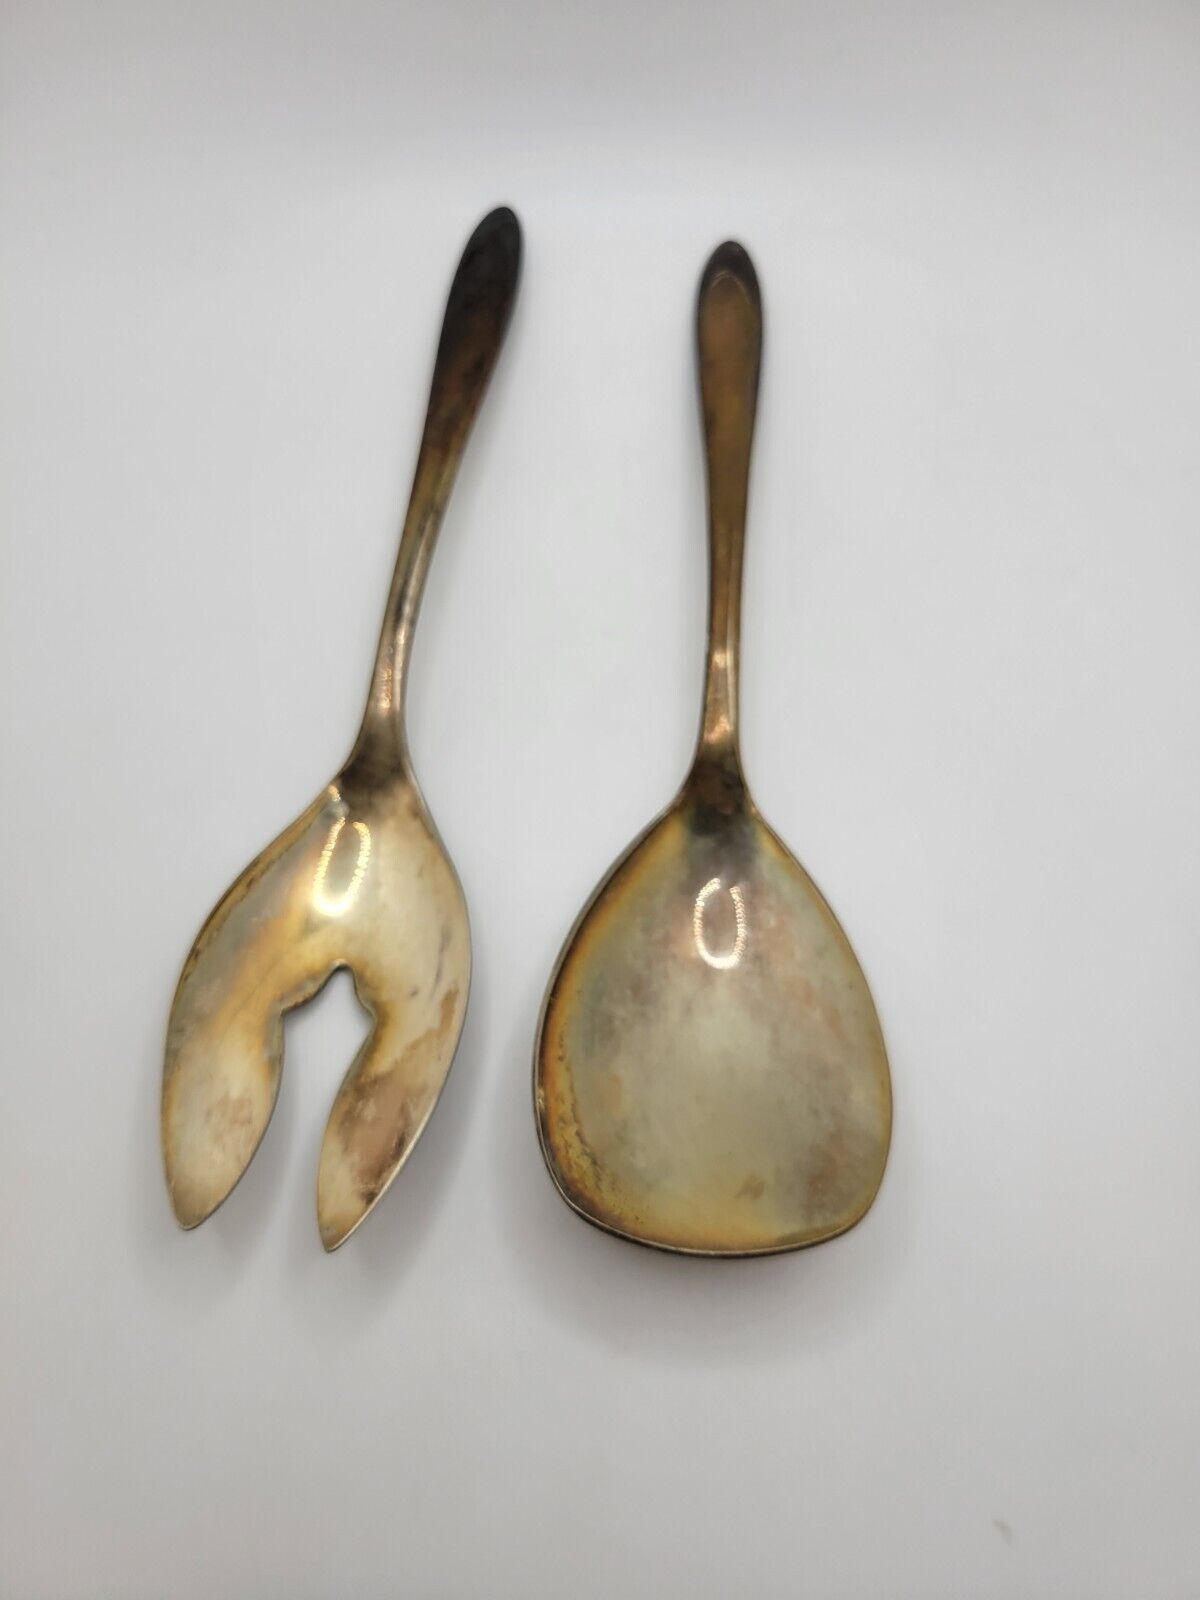 Meriden Silverplate Co. Spoon And Salad Fork Pair